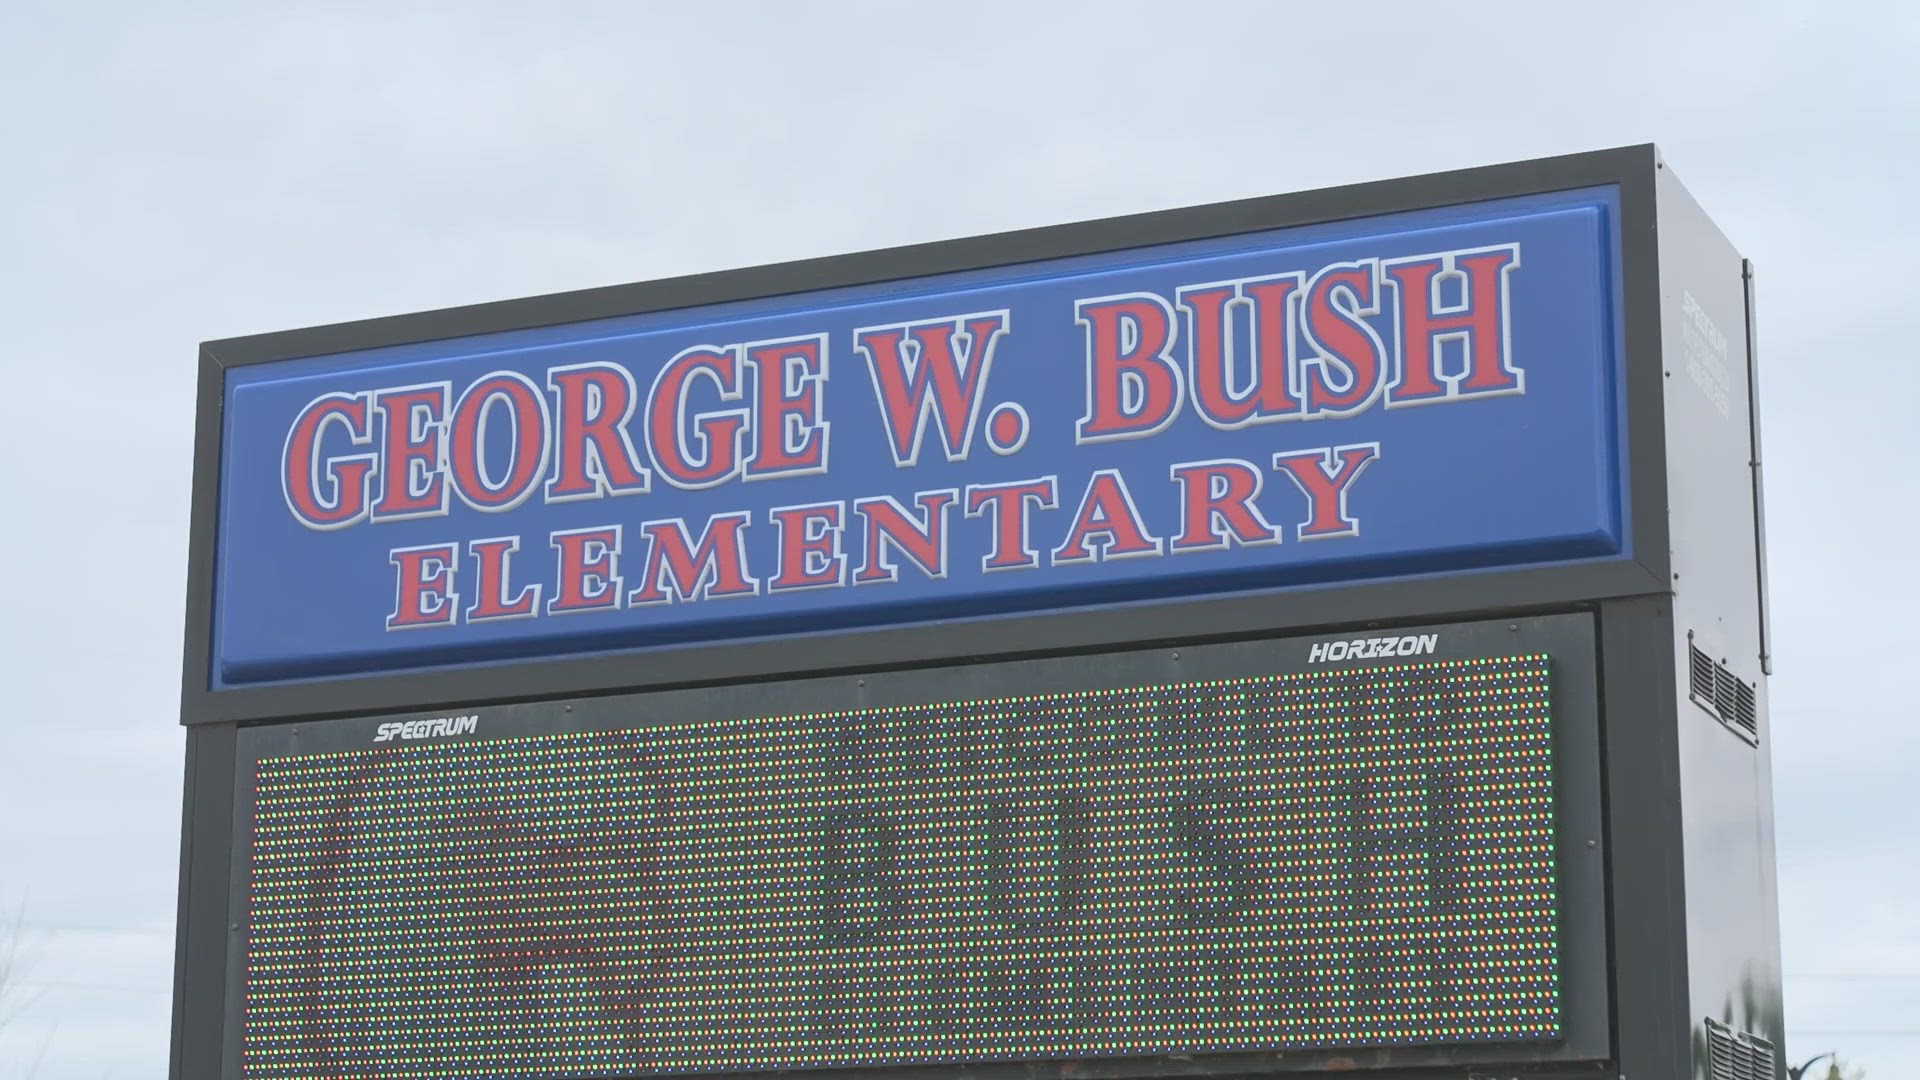 Parents have been funding the effort to make sure an armed security officer is on campus at all times at George W. Bush Elementary School.